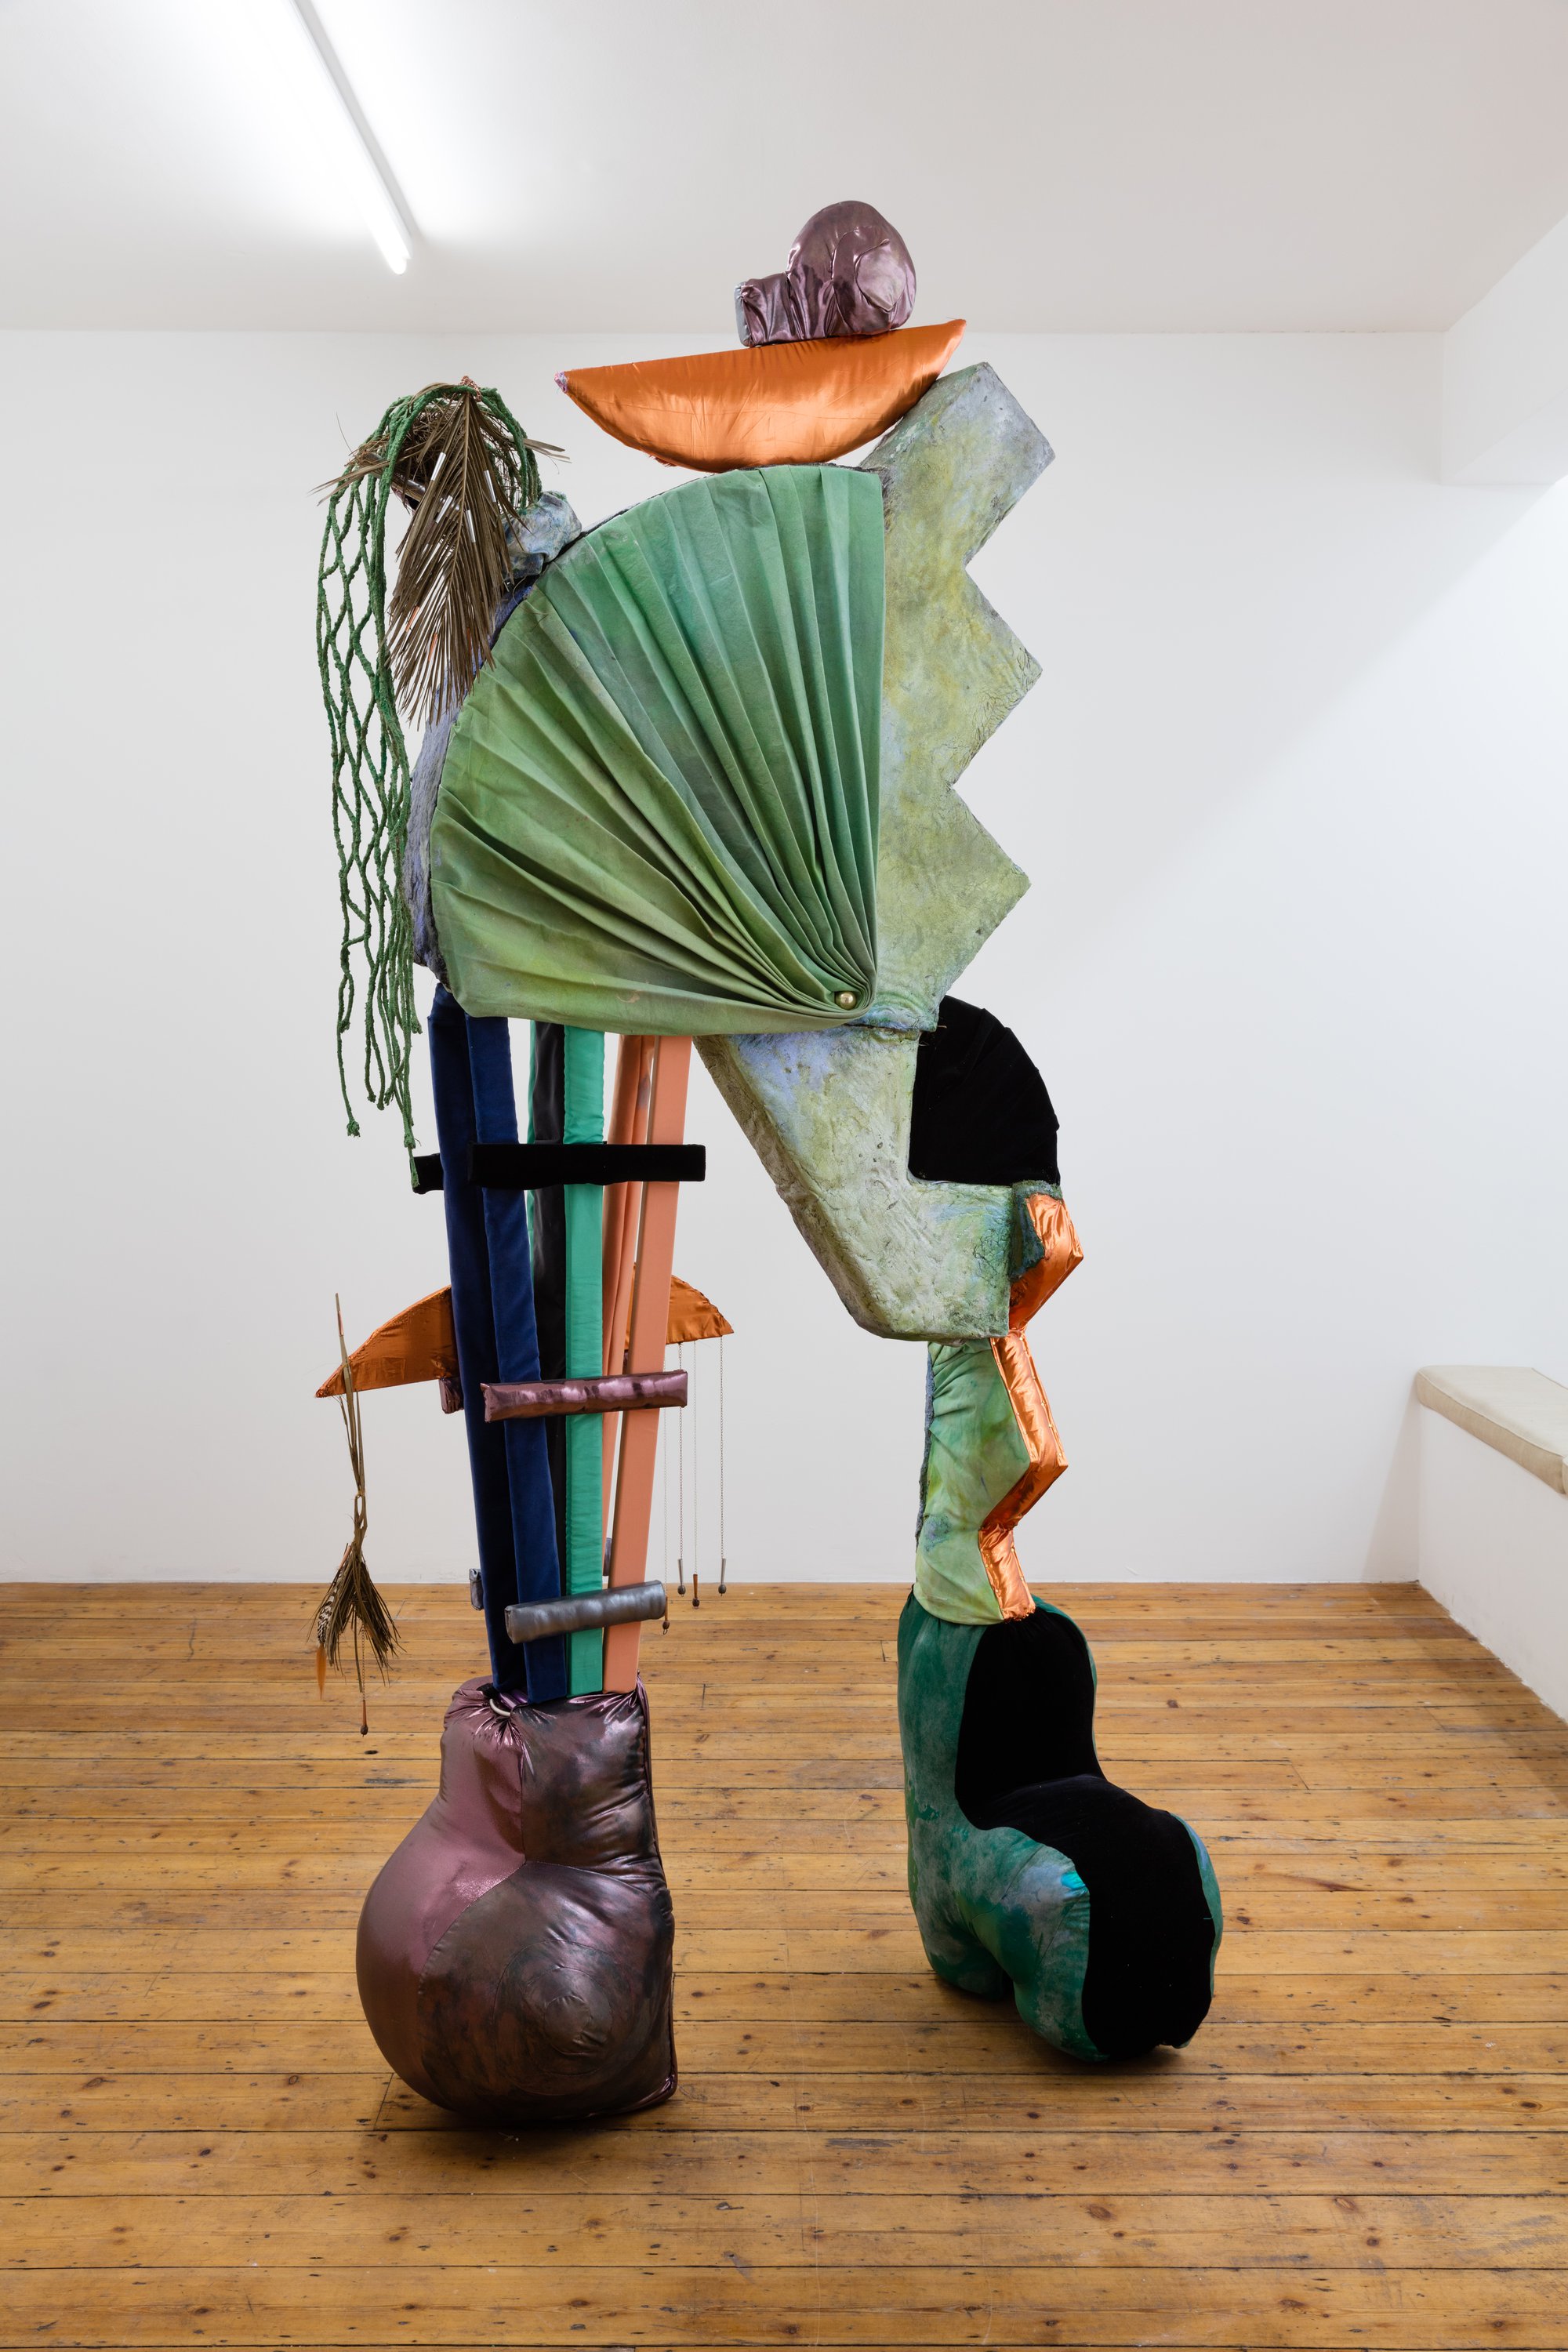 Tamara Henderson, The Scarecrow&#x27;s Holiday, textile, wood, glass, sand, pigment, rope, 260 x 112 x 56 cm, 2015